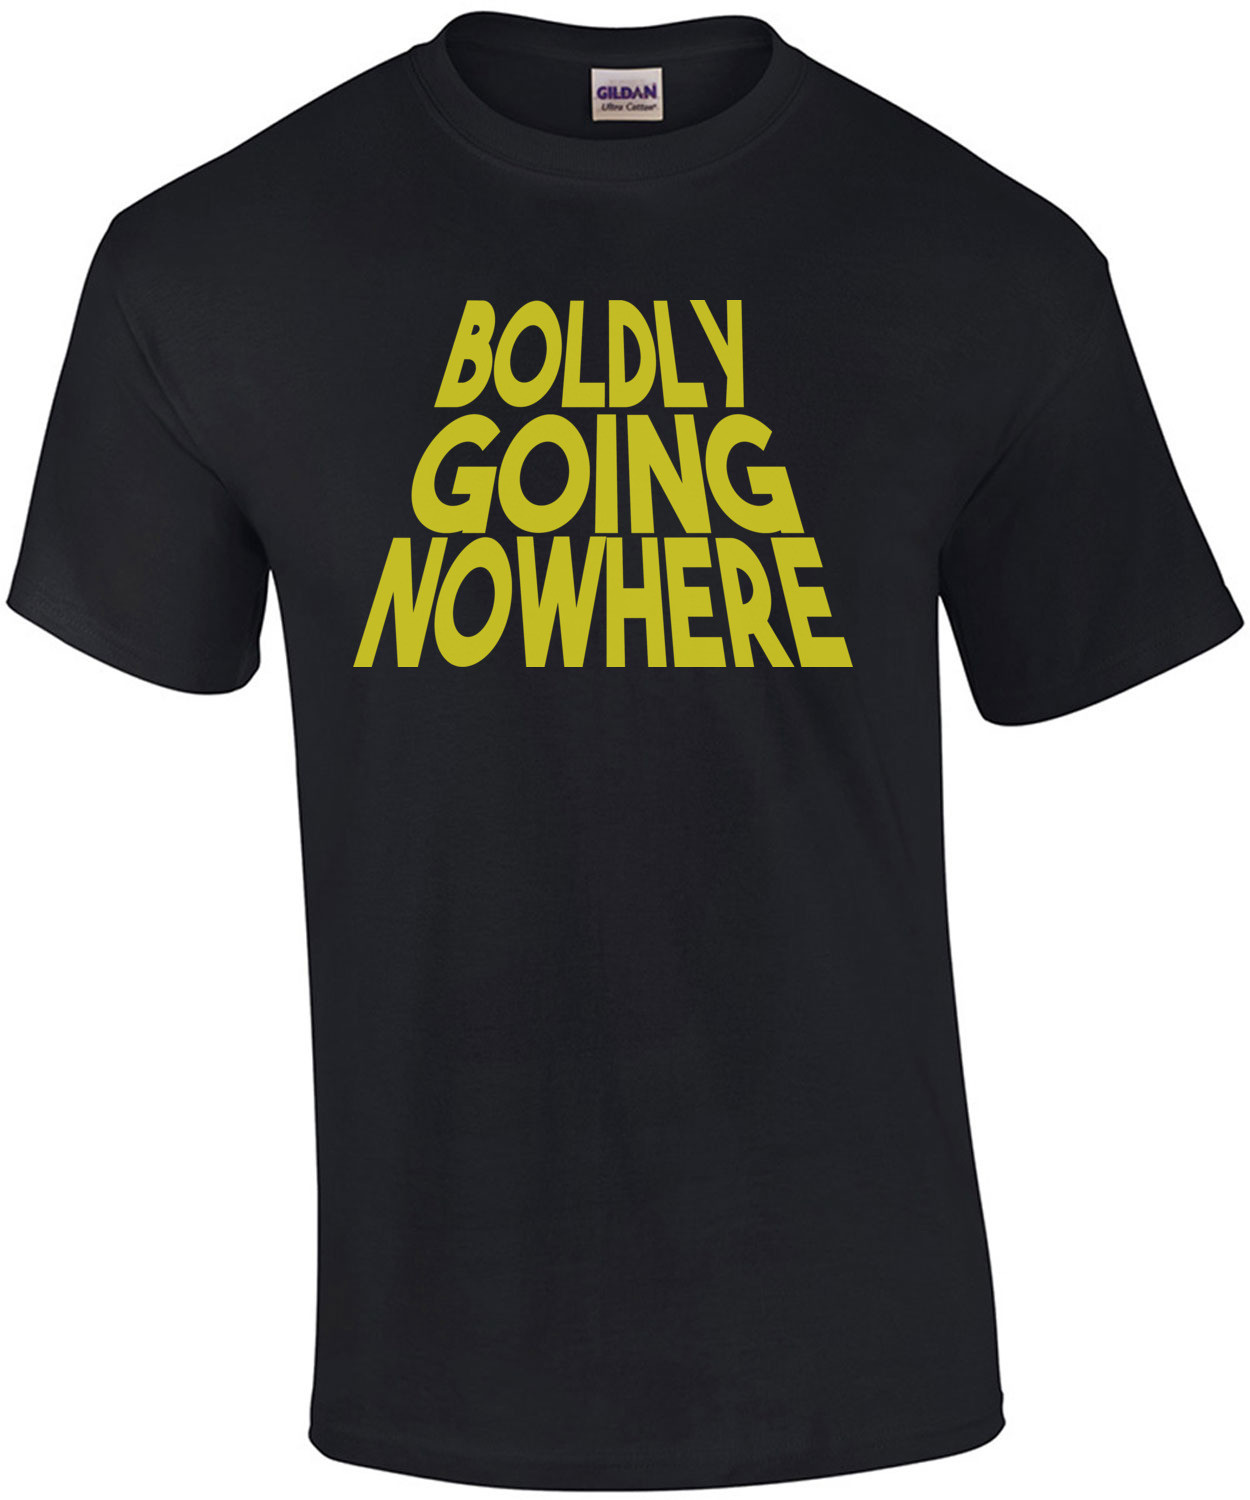 Boldly Going Nowhere Shirt